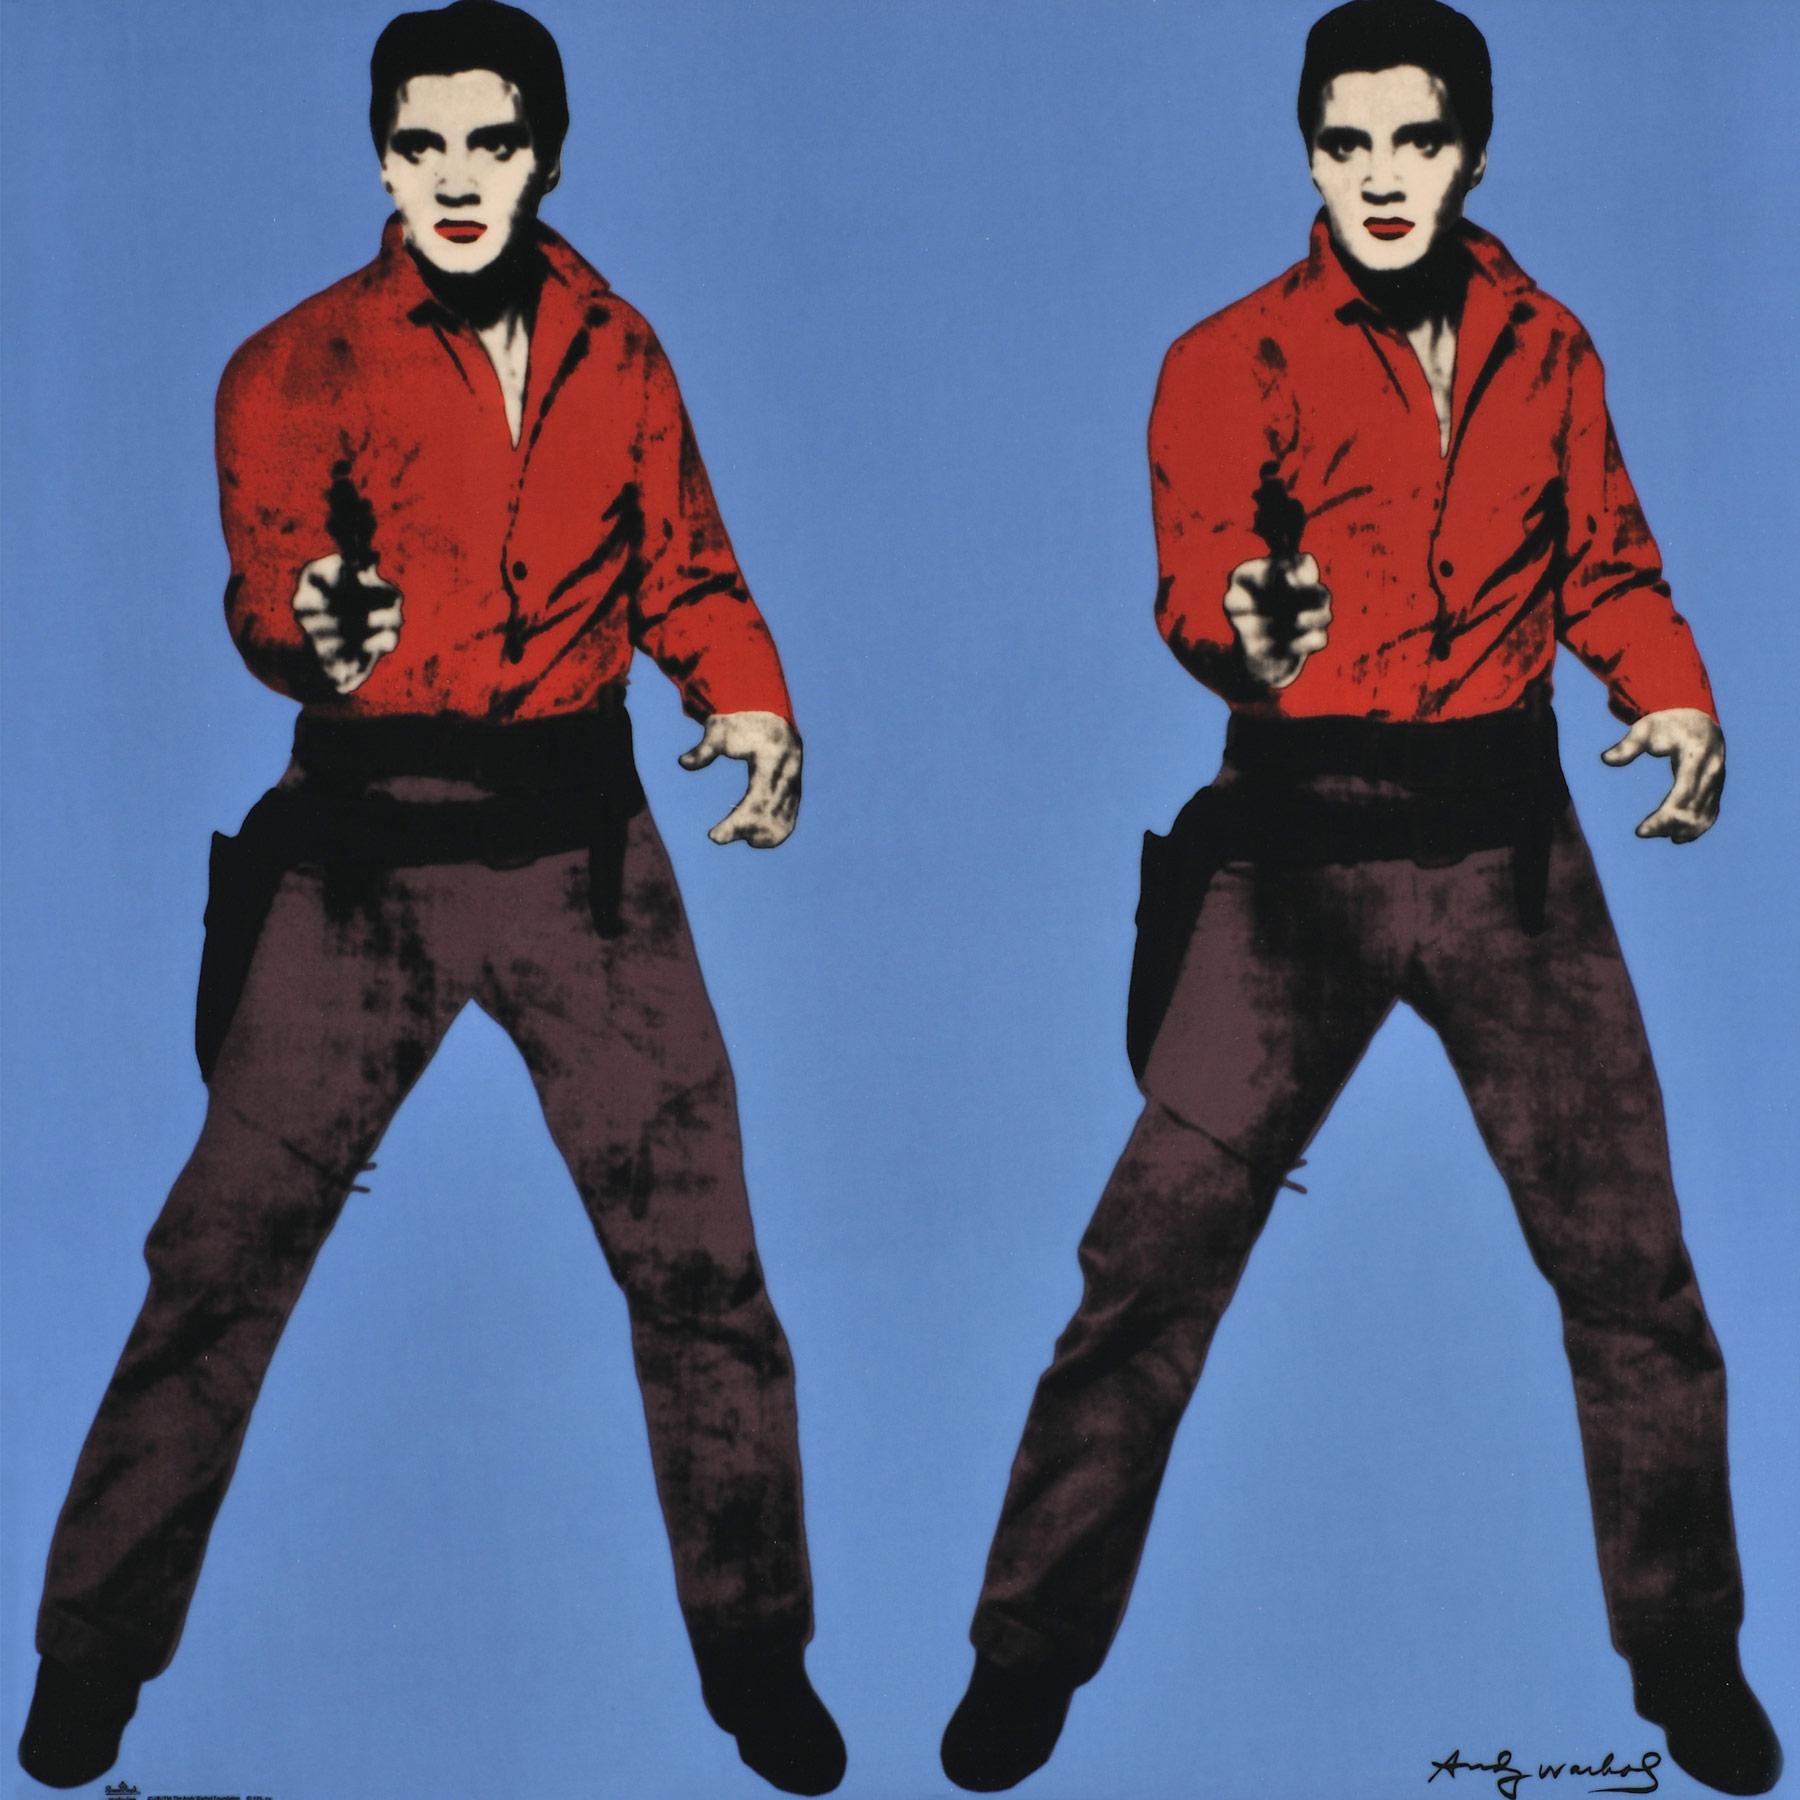 ANDY WARHOL
Blue Elvis
Edition of 49
From Rosenthal Studio Line
51 x 51 cm (20.1 x 20.1 in.)
Signed in glaze (fac-simile signature), numbered on the reverse on label In wooden box, accompanied by Certificate of Authenticity from the Rosenthal Studio